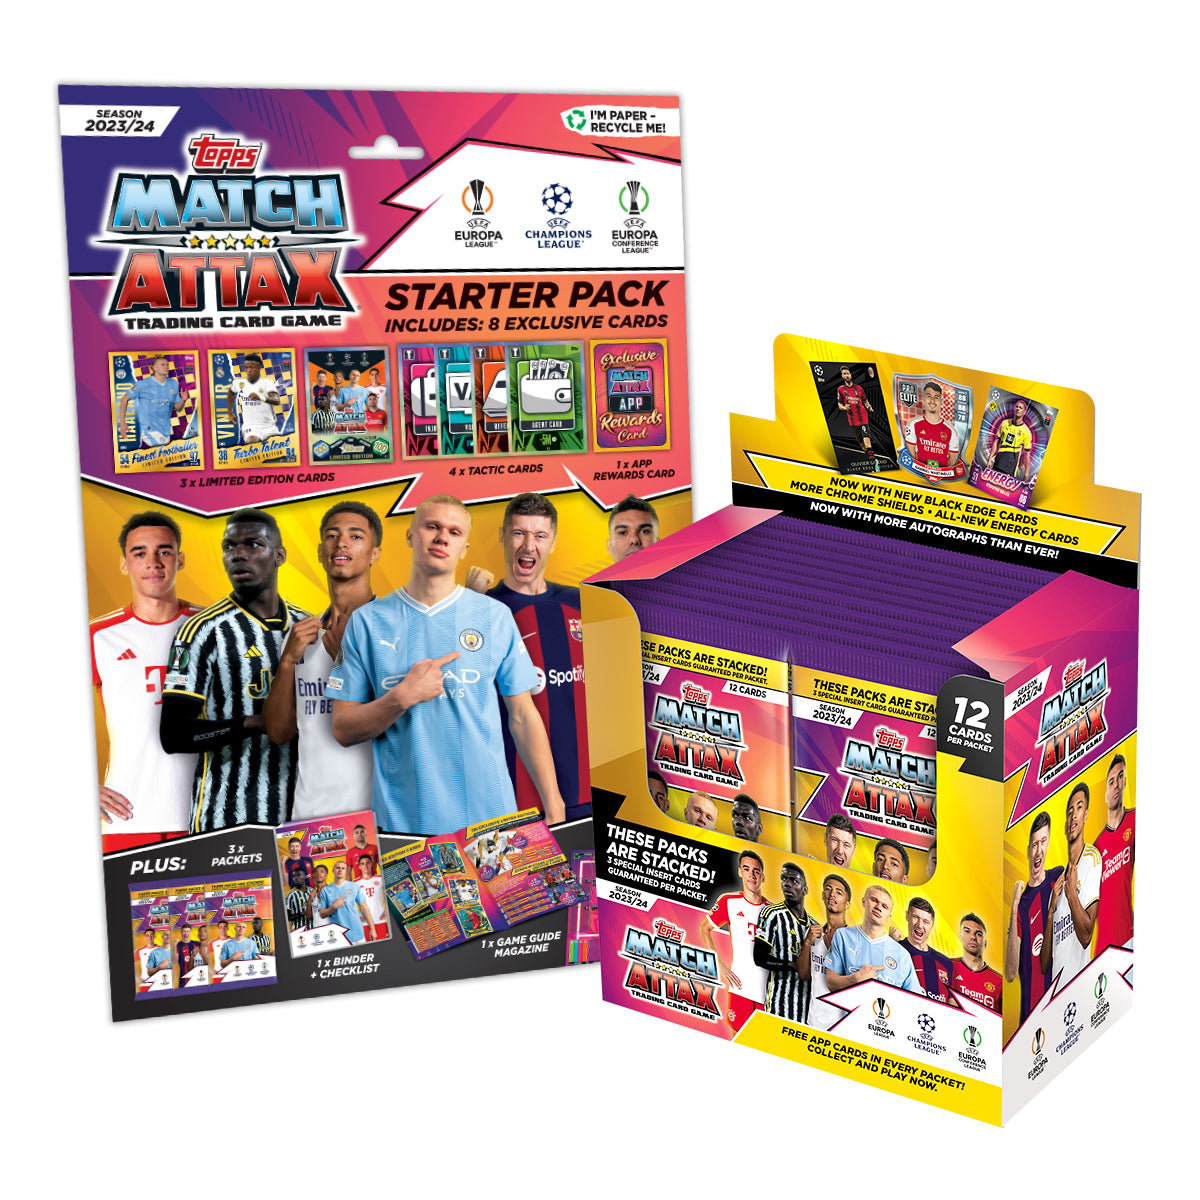 2023-24 TOPPS MATCH ATTAX UEFA CHAMPIONS LEAGUE CARDS - BUNDLE #1 (BOX & STARTER PACK) (ALBUM, 324 CARDS + 3 LE) (IN STOCK NOV 5)